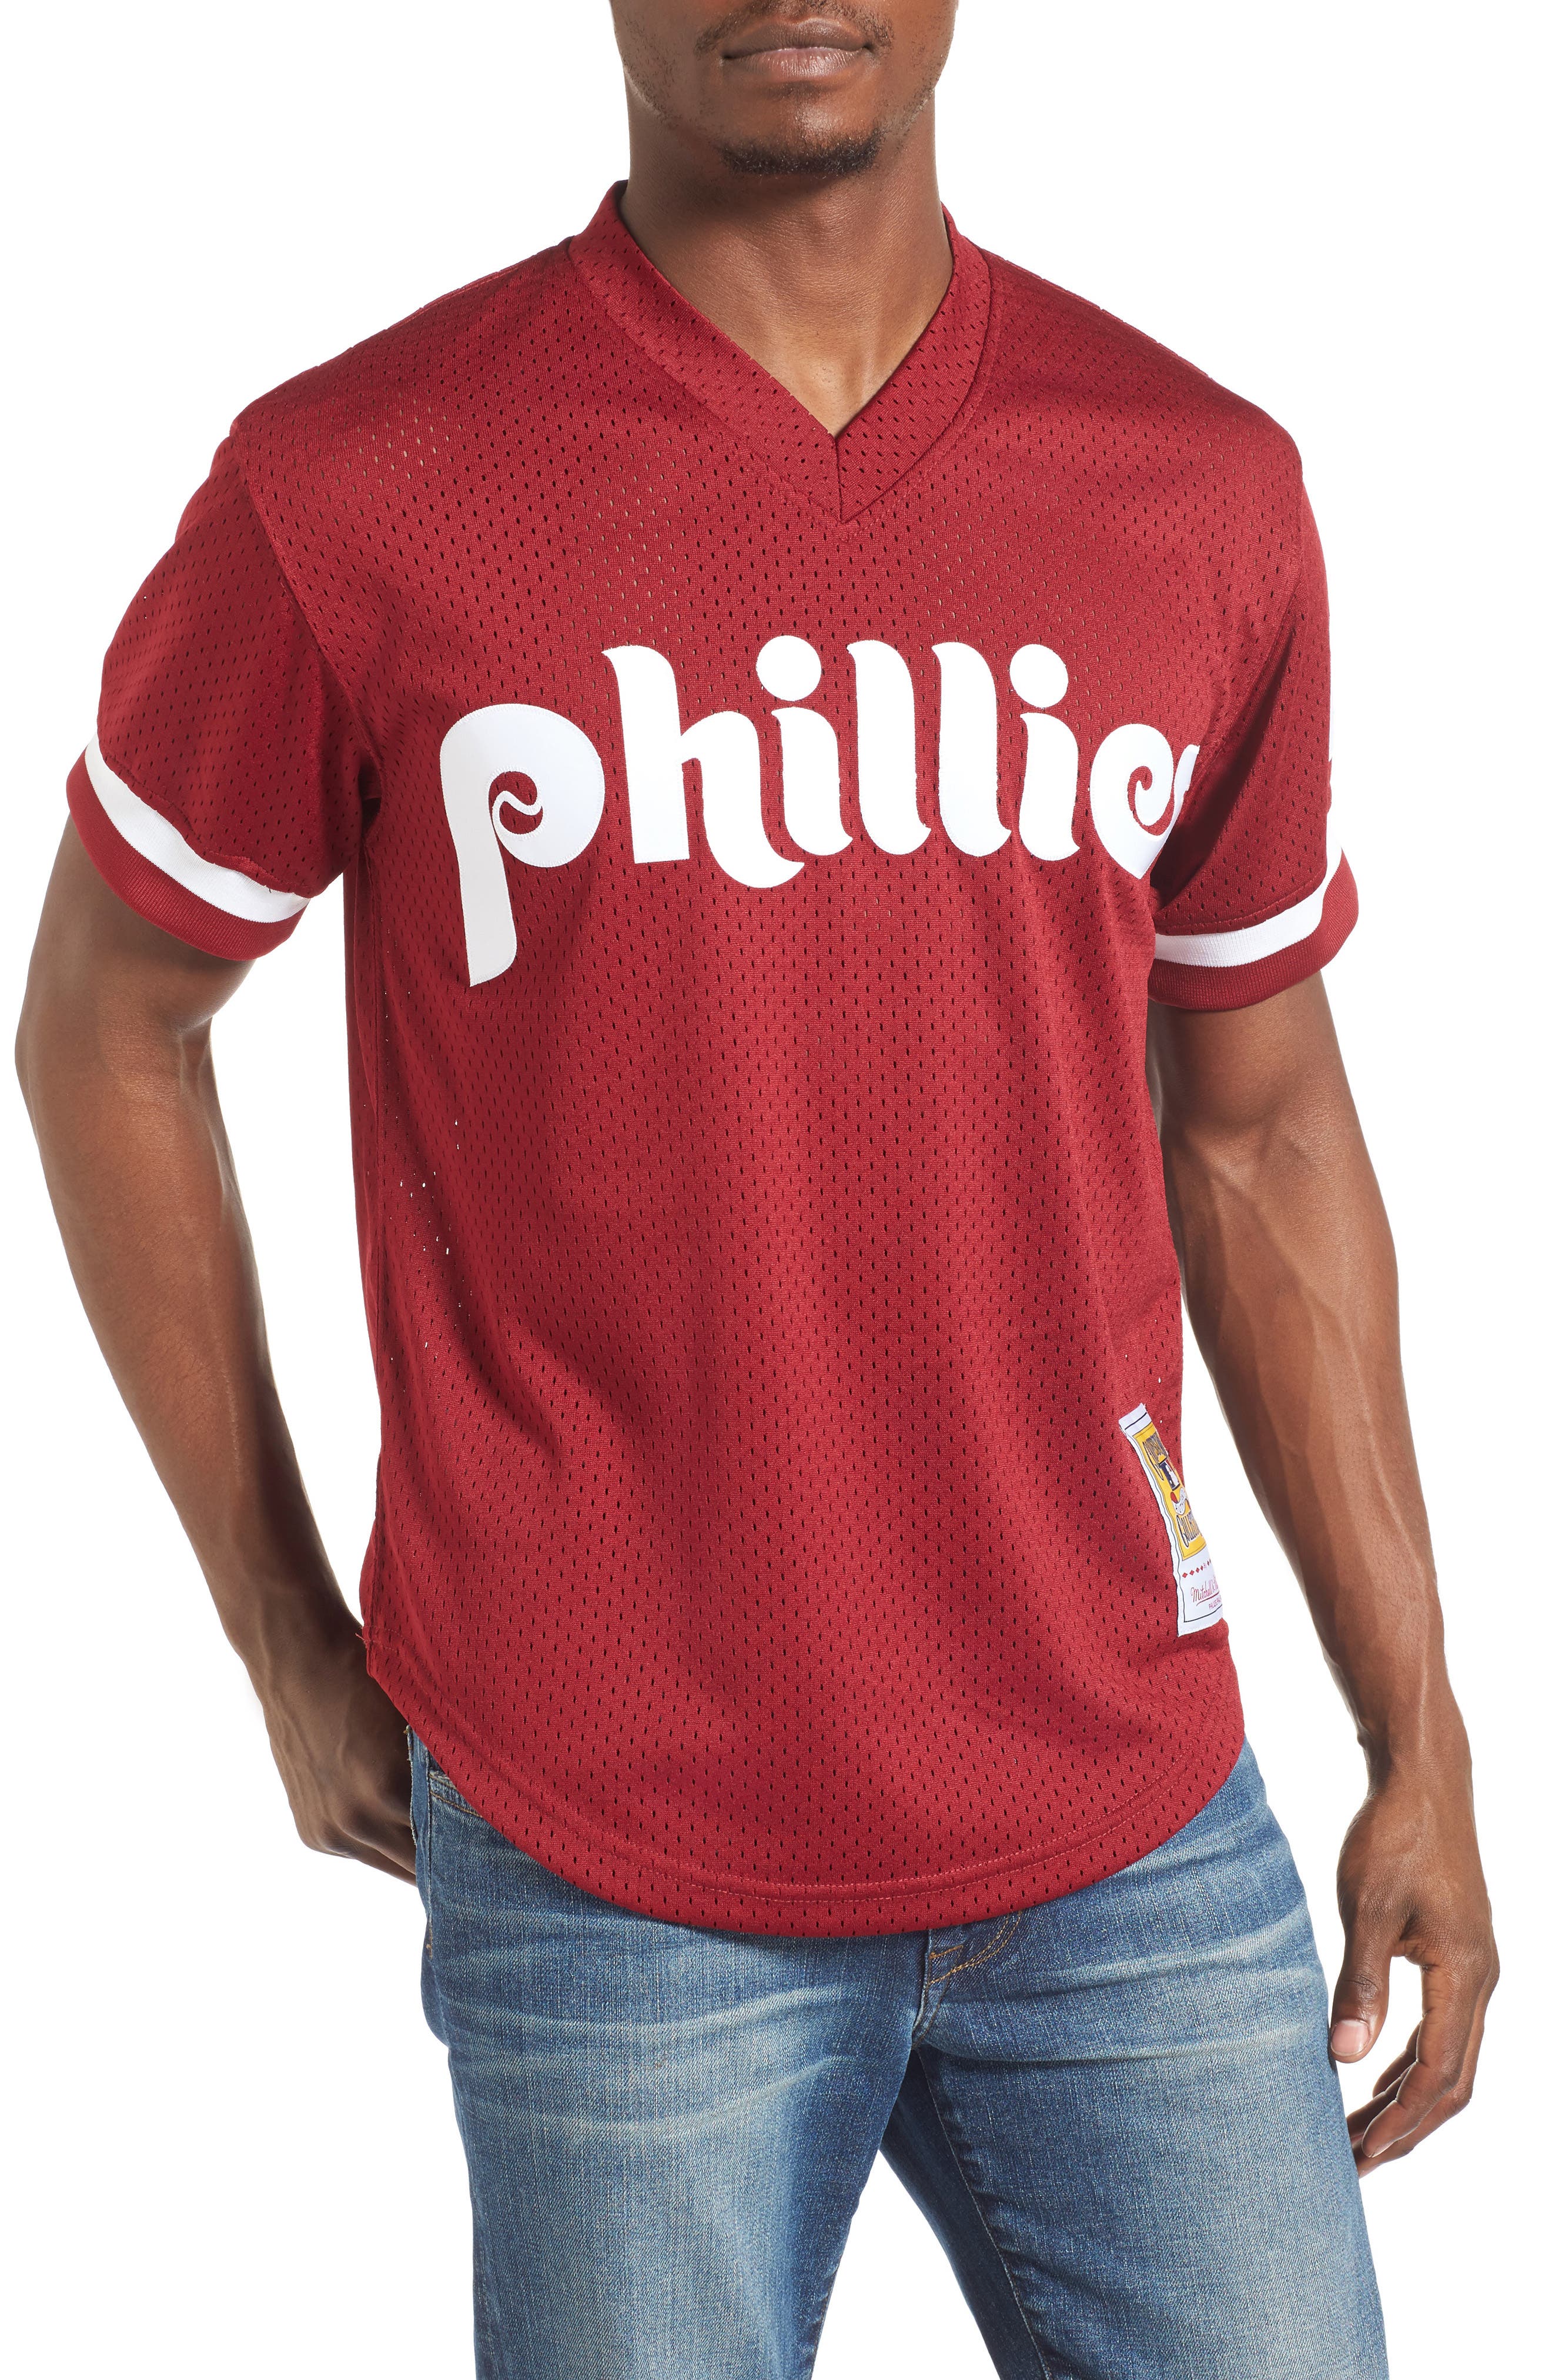 mitchell and ness phillies